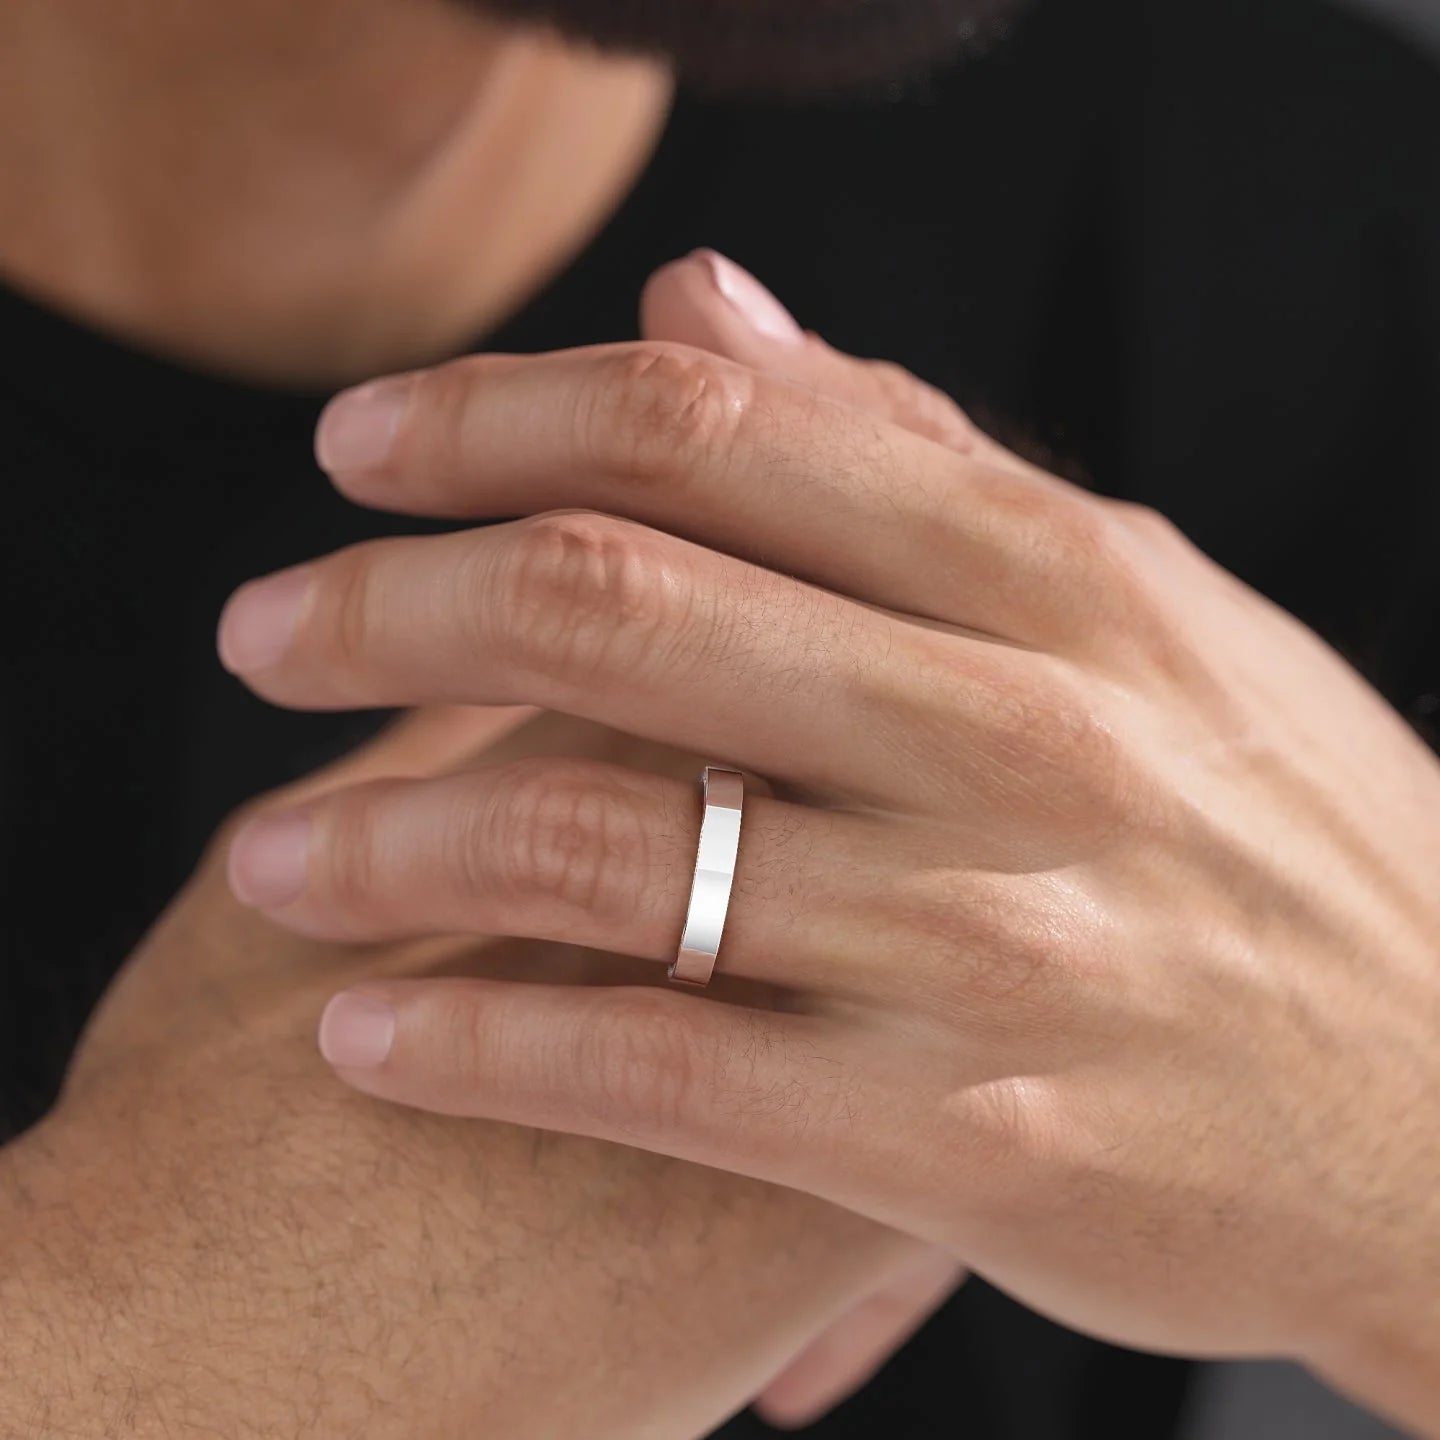 Men's Wedding Bands: the Good, the Bad and the Ugly | Frank Darling